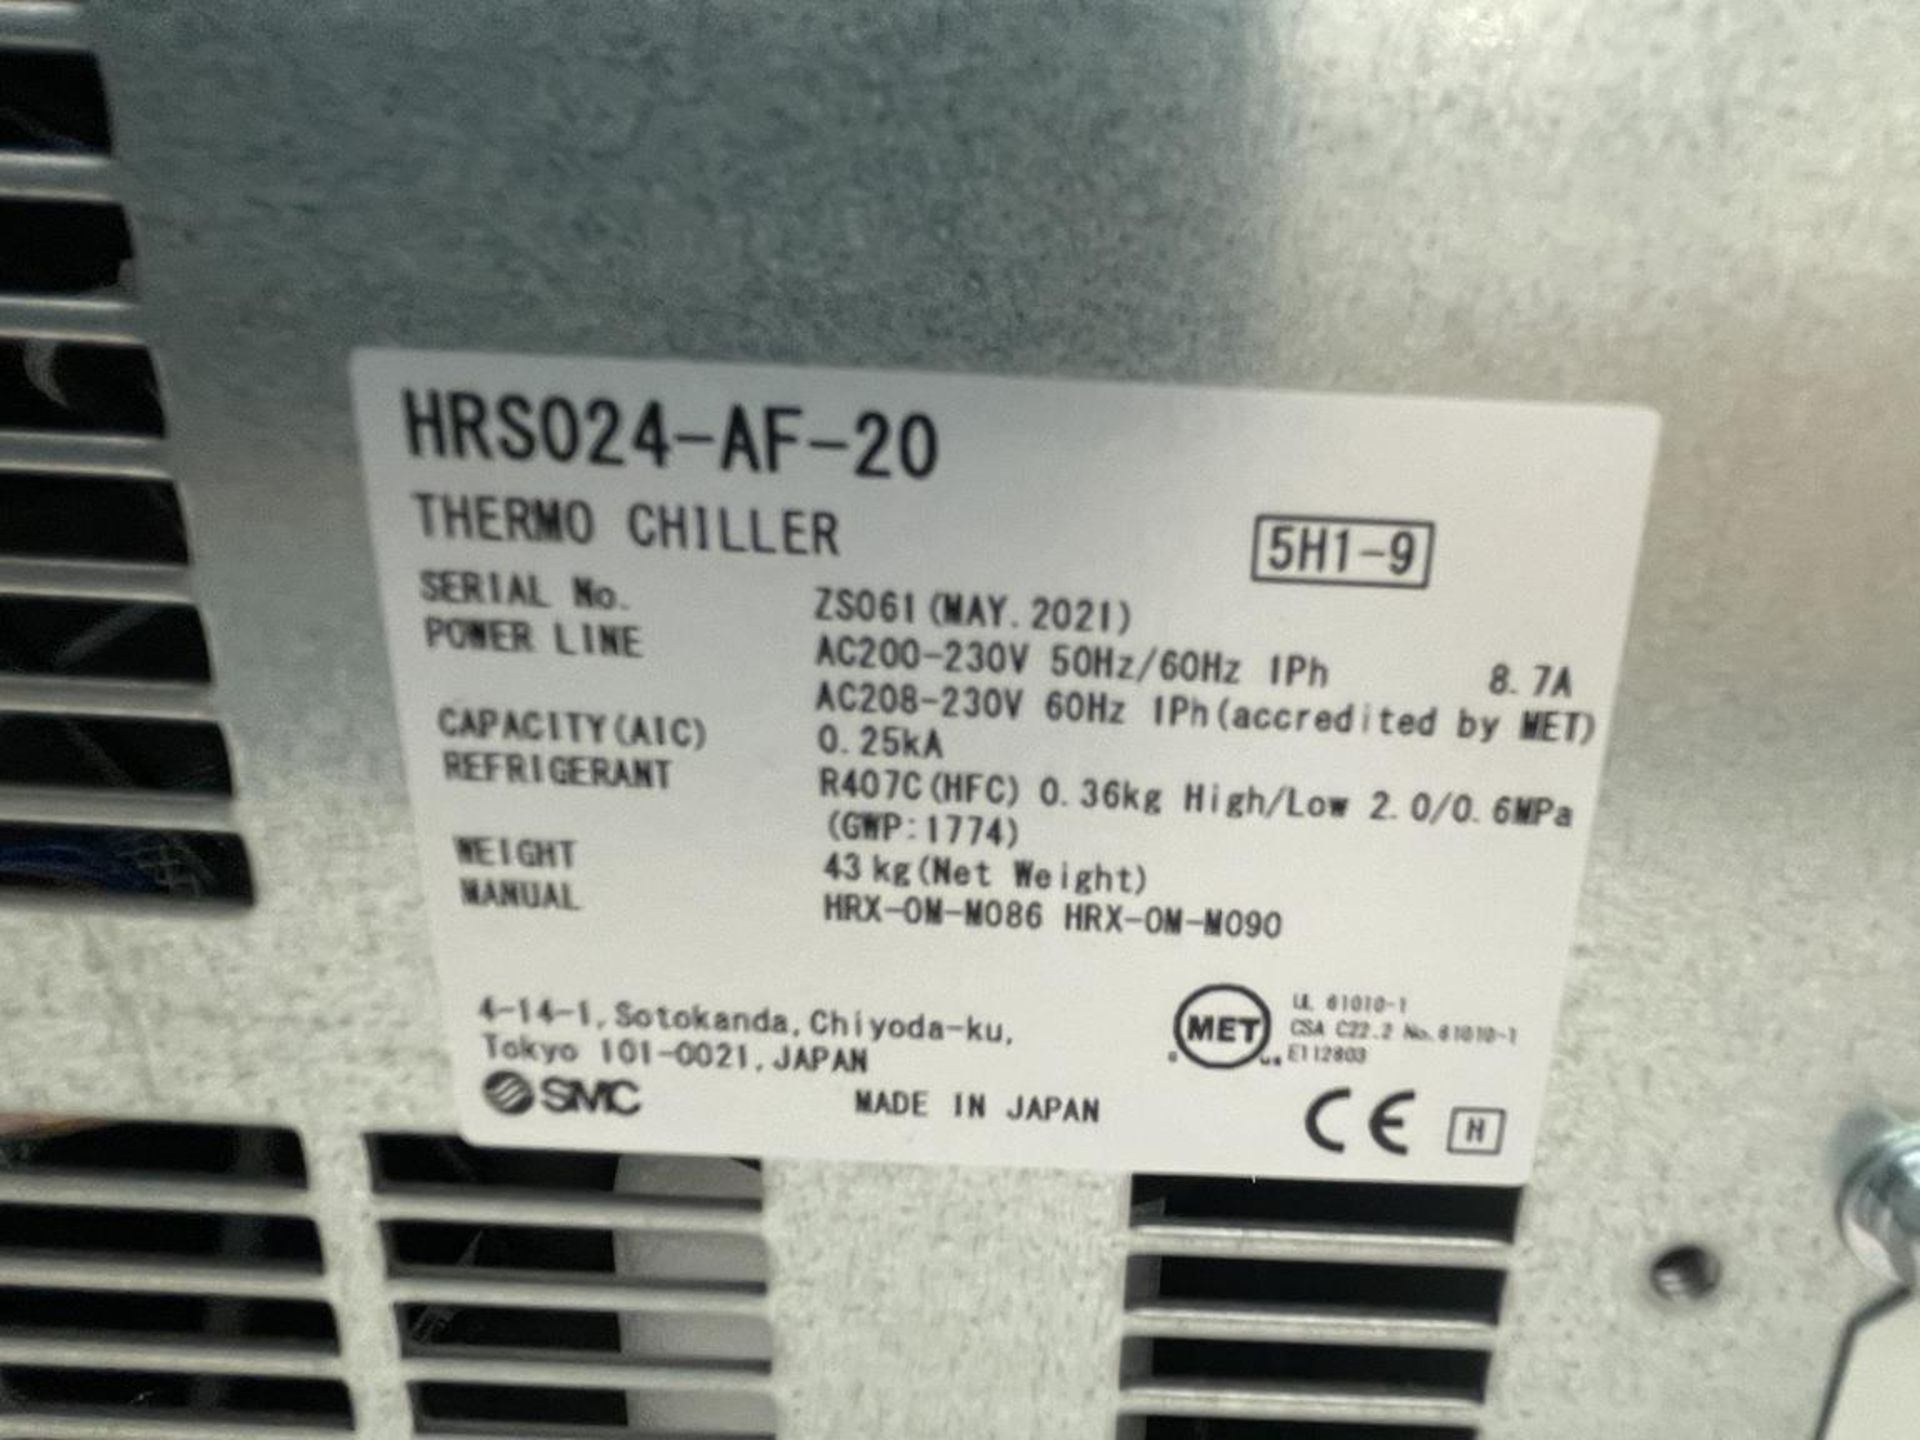 SCM S&A, HRS024-AF-20 thermo chiller, Serial No. ZS061 (DOM: 2021) - Image 2 of 2